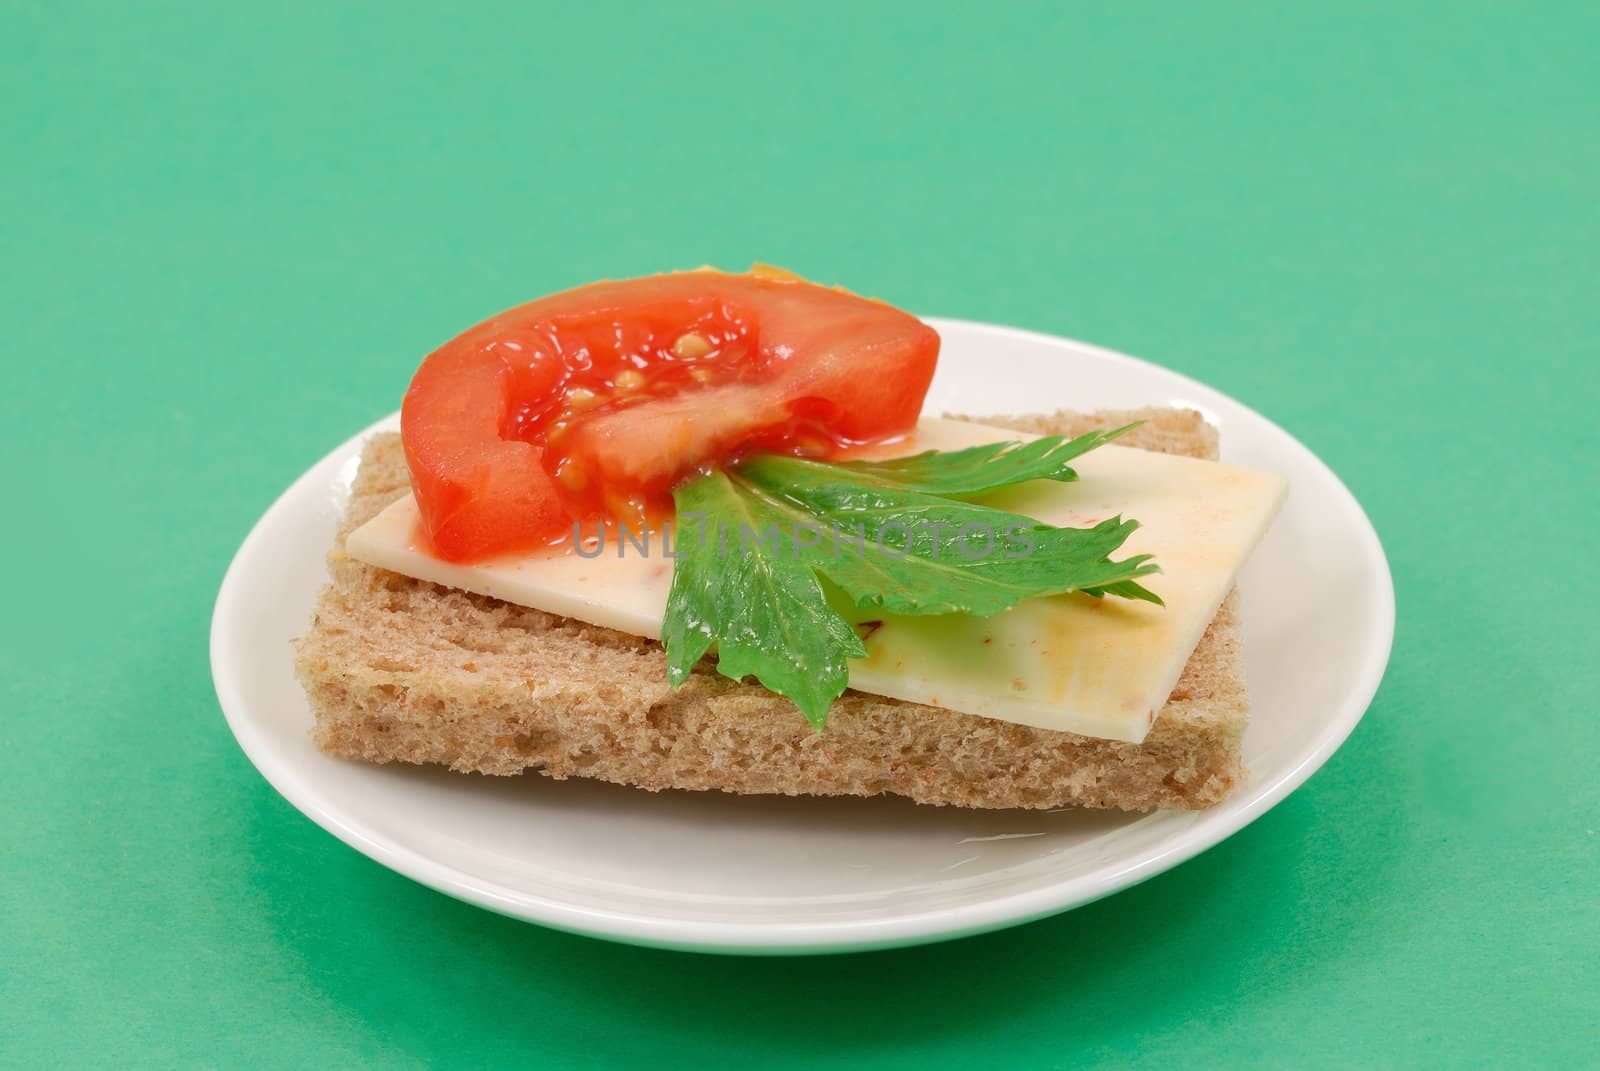 Buterbrob with Mexican cheese, slice tomatoes and green leaves of parsley
